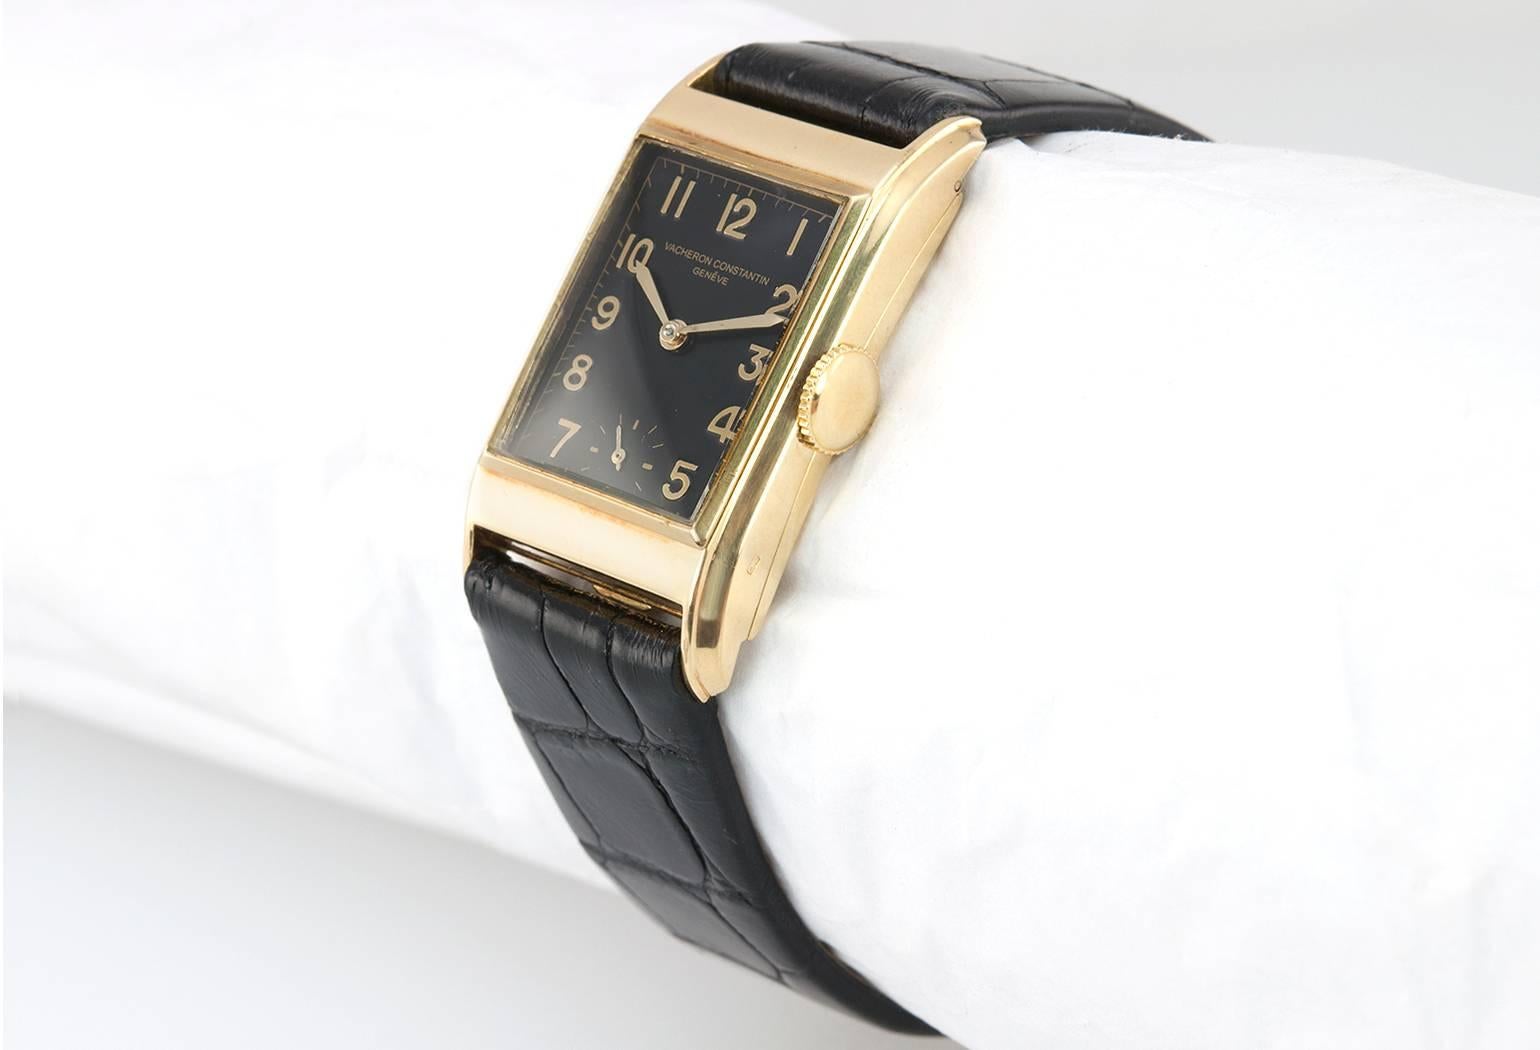 Vacheron & Constantin dress model wristwatch in 18 karat yellow gold, case numbers 264326. This beautiful watch features a V&C signed case, with movement numbers being 421062, a black refinished dial with gold stick roman numerals, an 18 karat